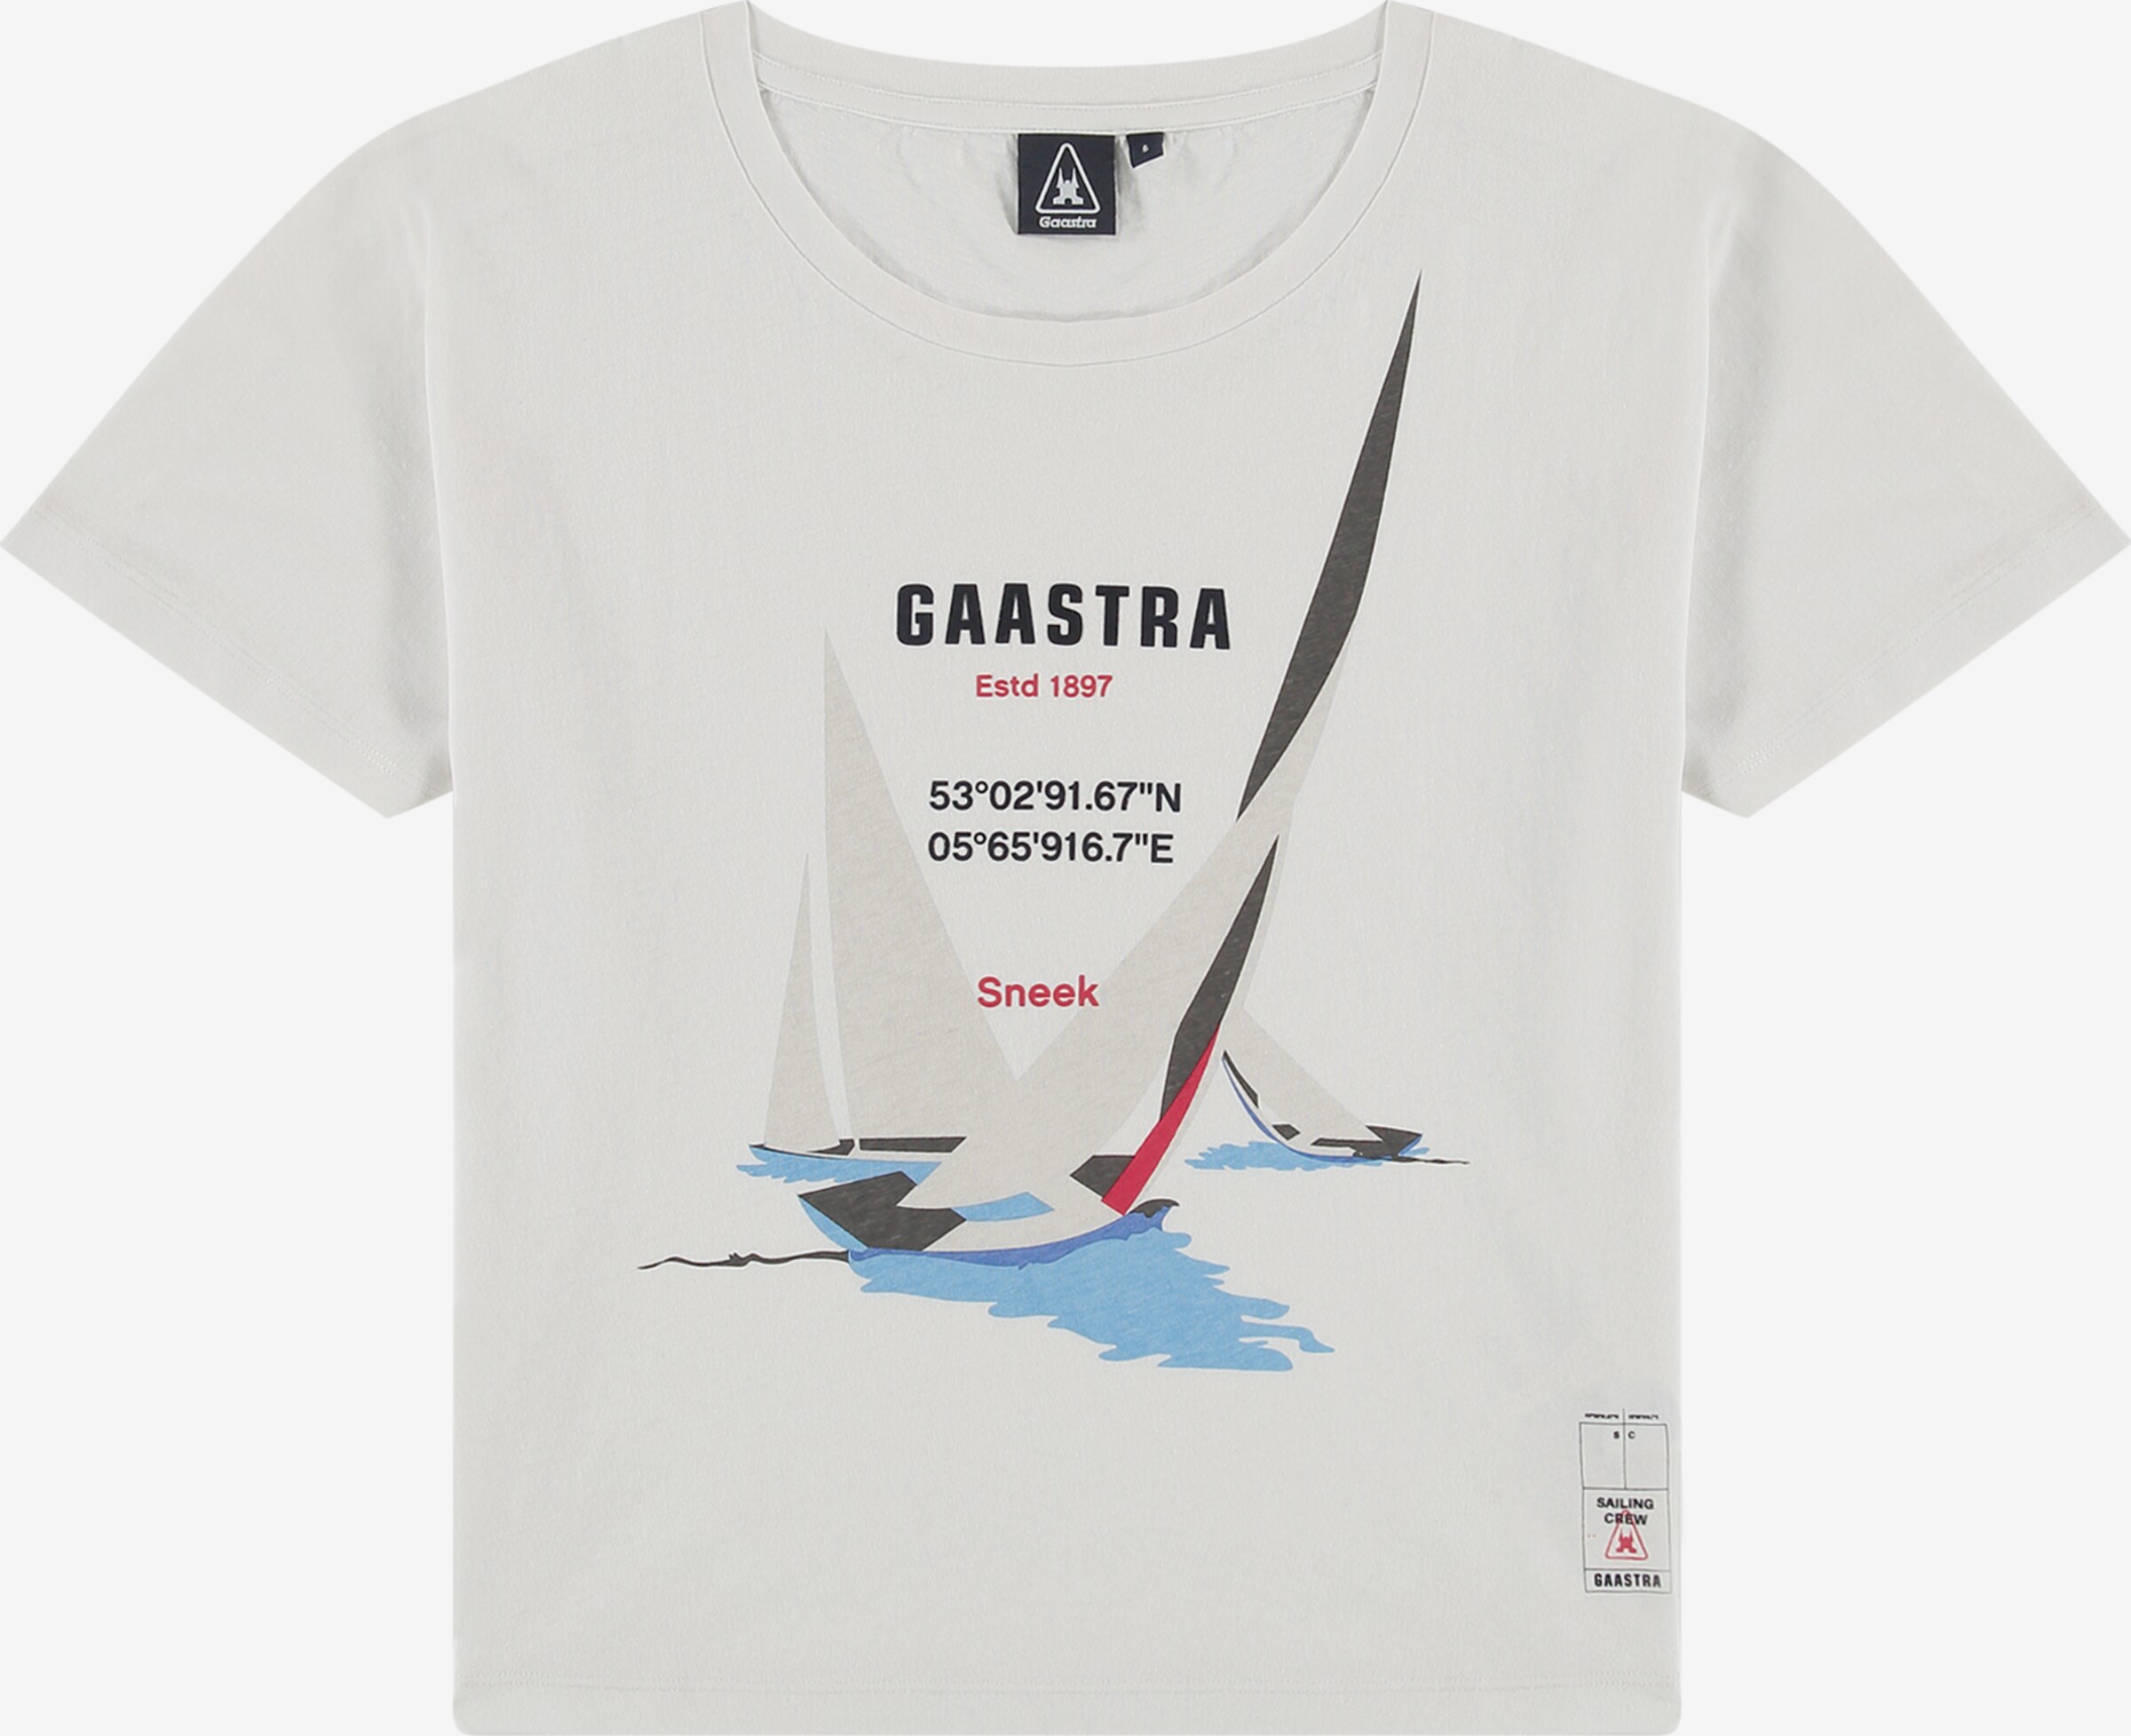 rivier Kamer Piepen Gaastra Shirt 'Inez' in Wit | ABOUT YOU